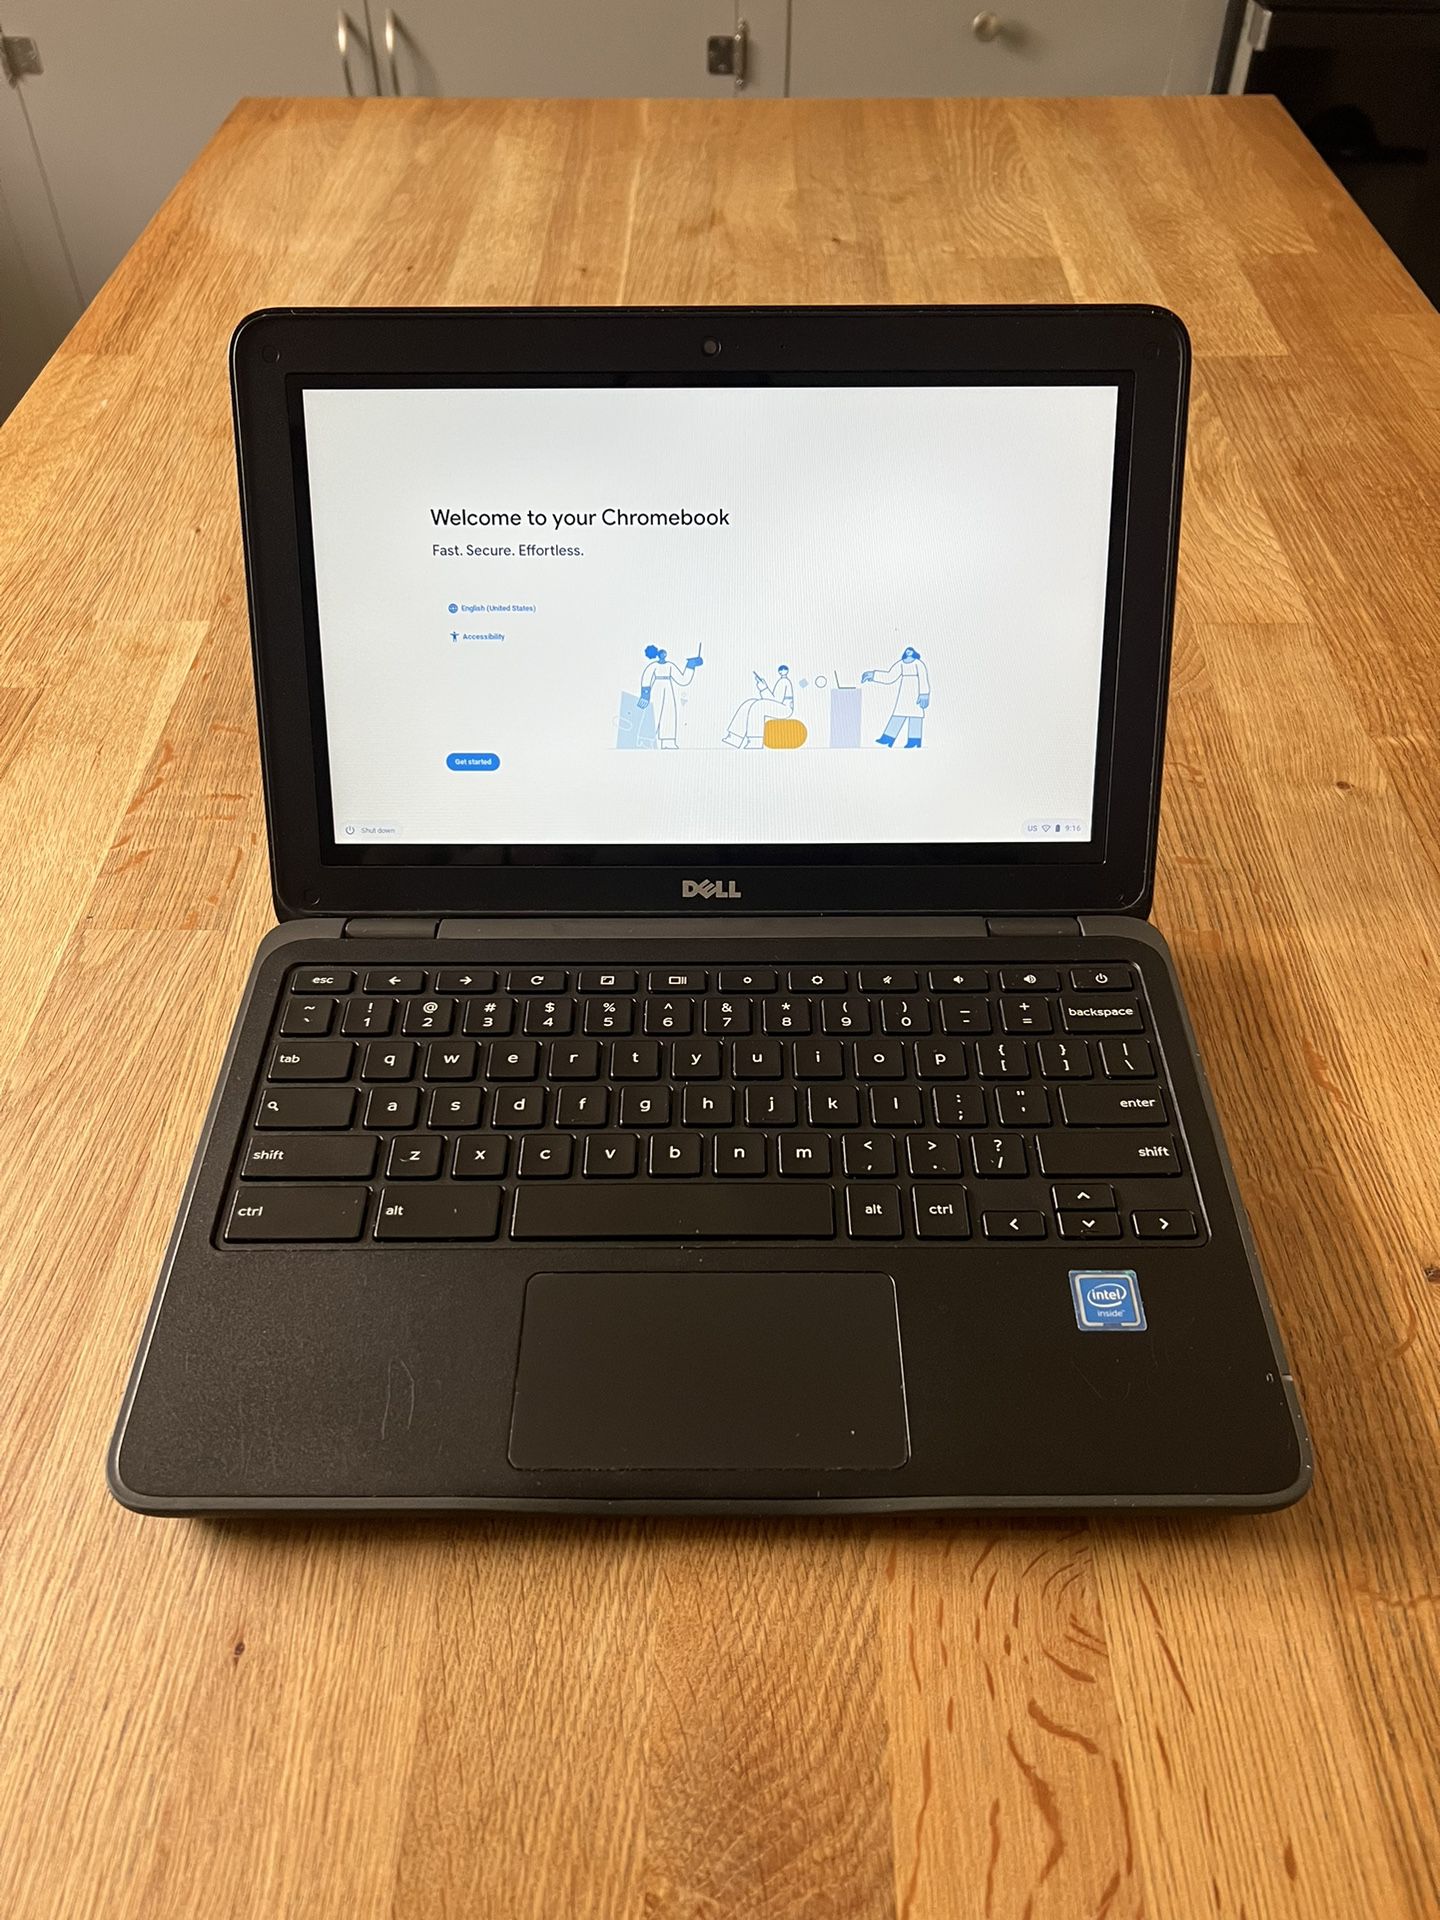 Touchscreen Dell Chromebook 11 Laptops - 3 Available / $30 Each